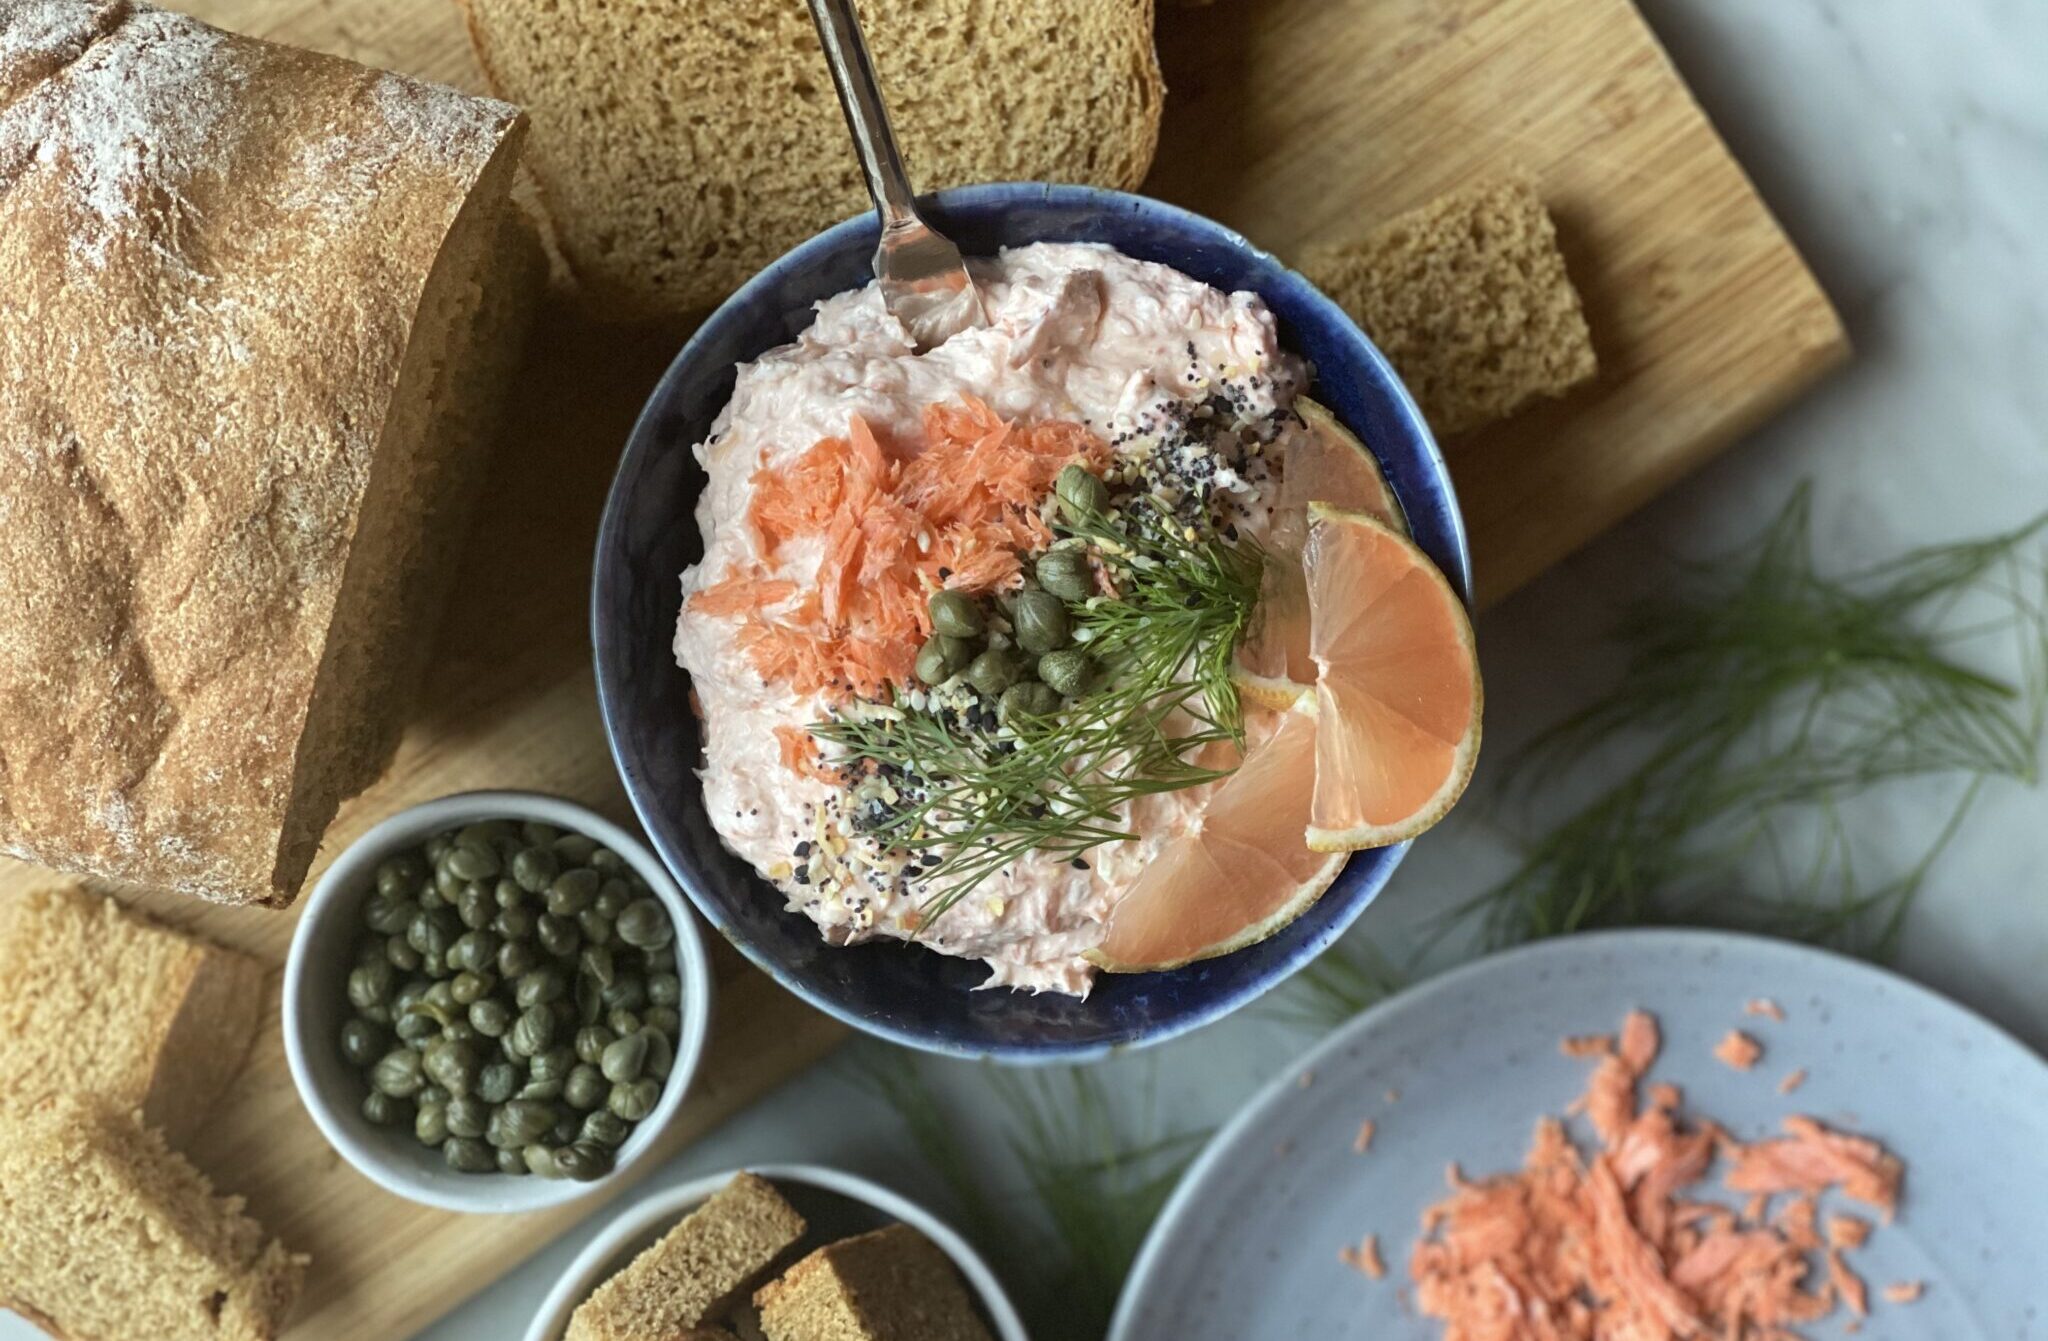 Smoked salmon spread with pink lemons and capers and bread